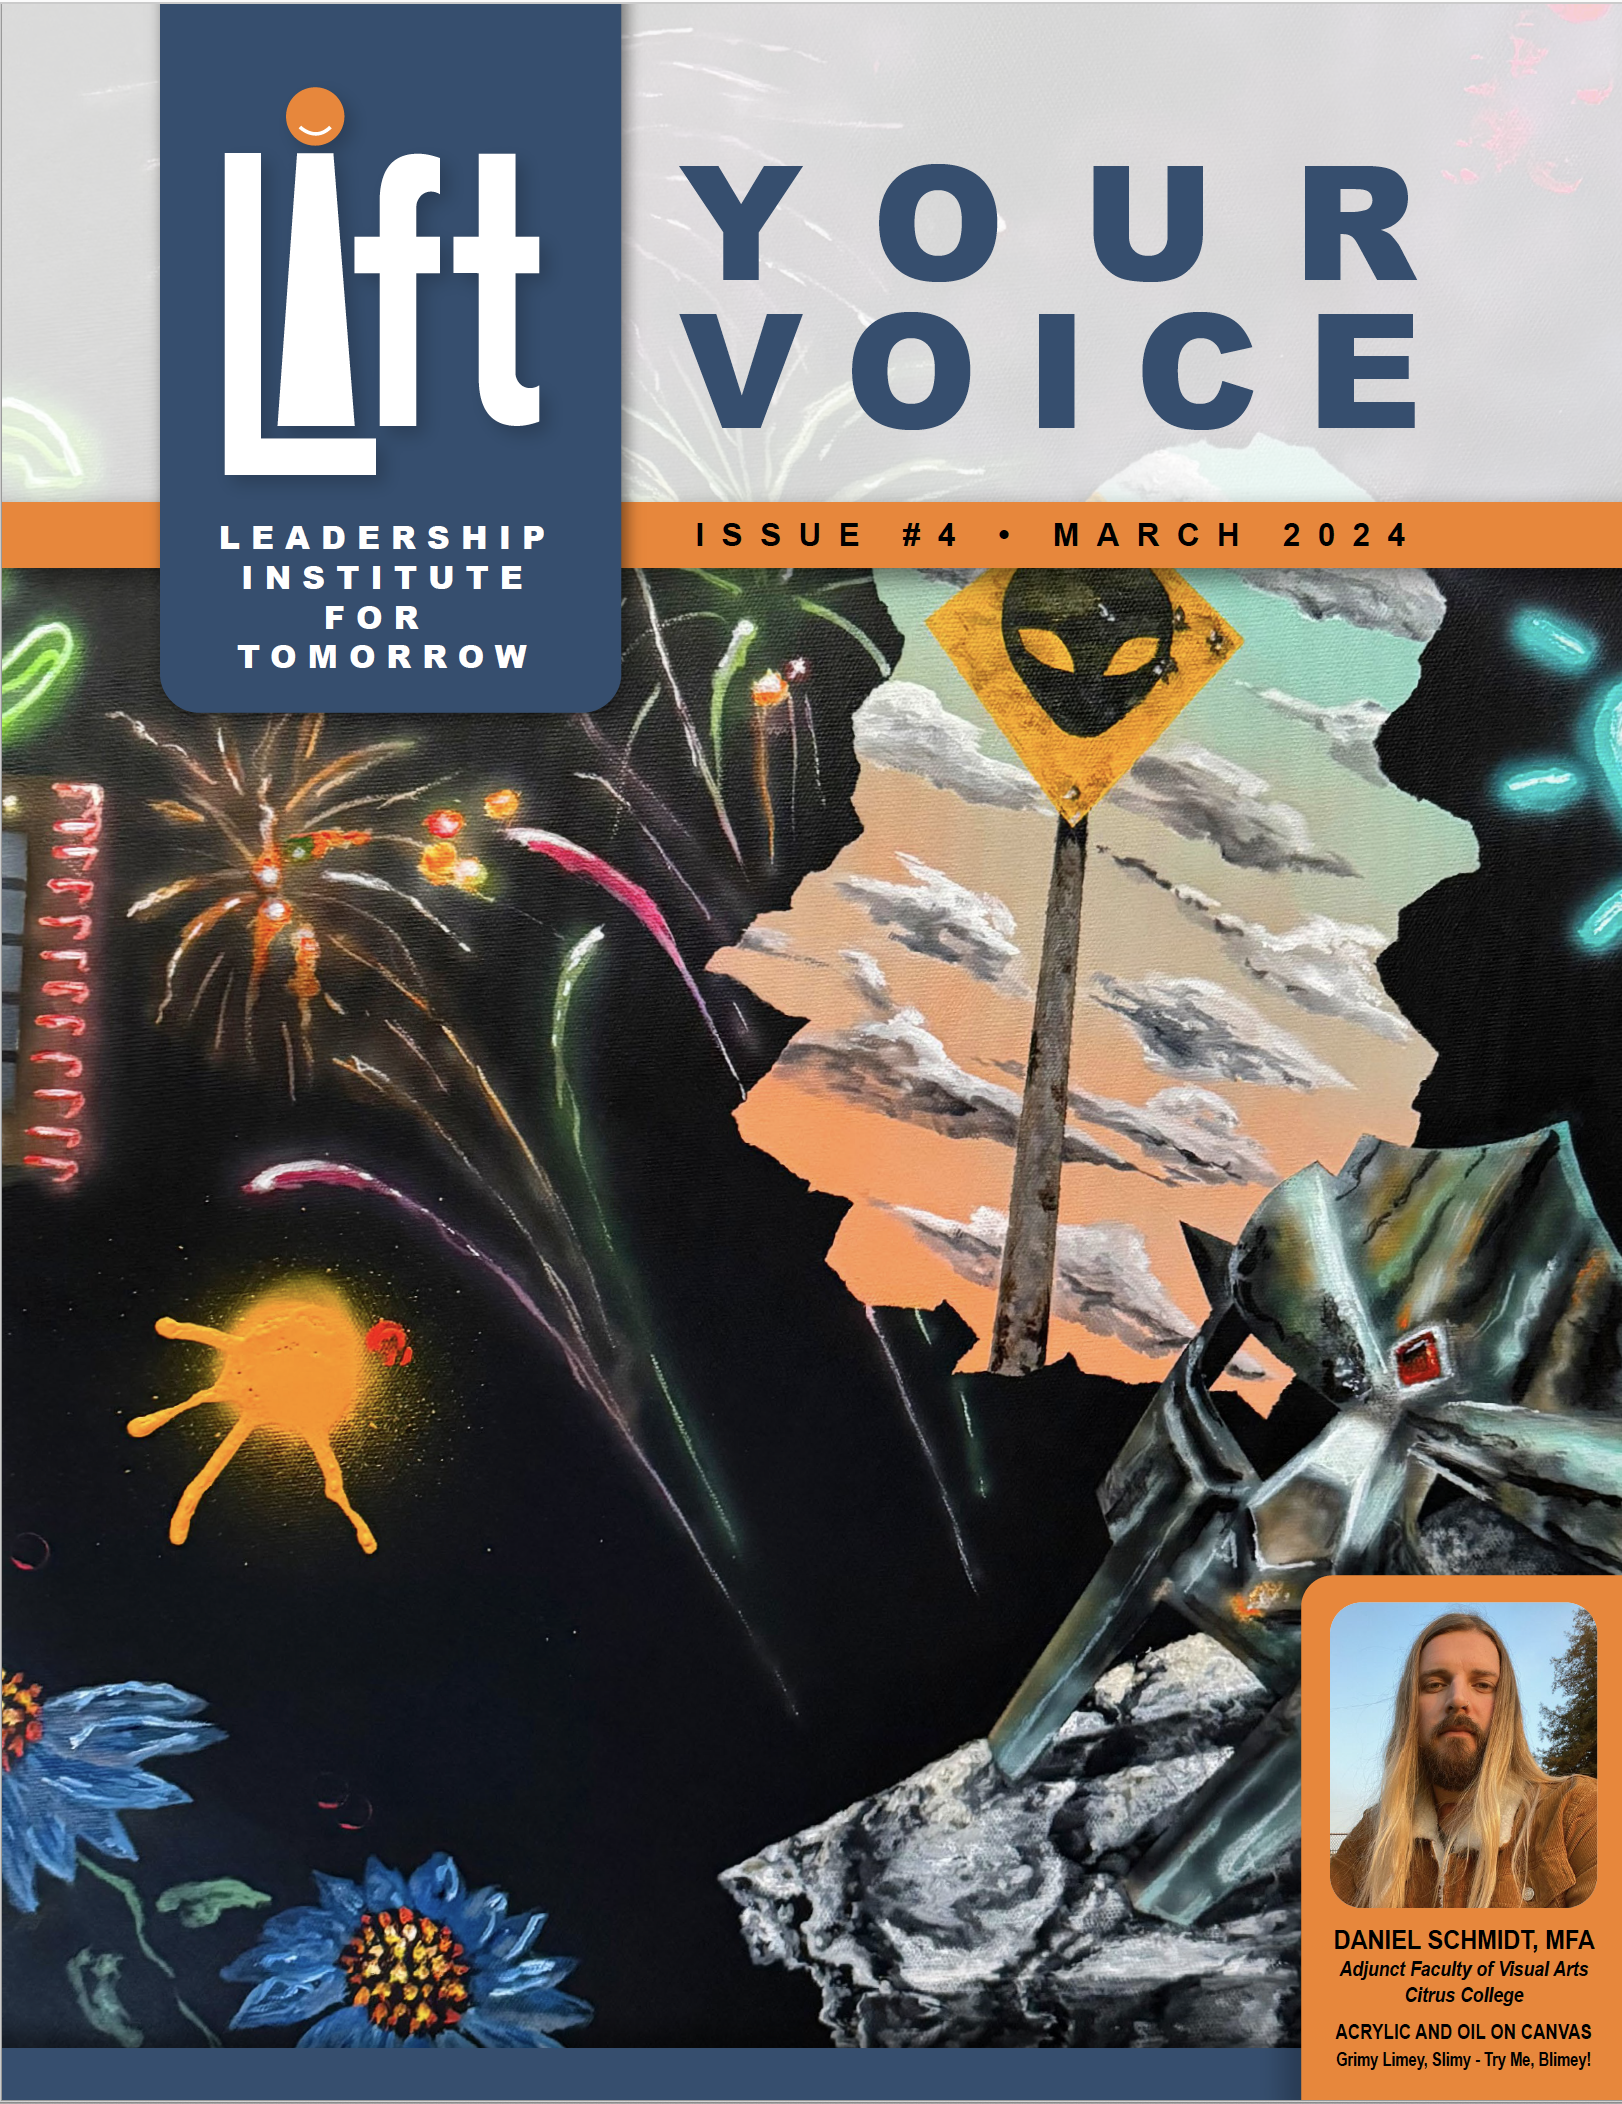 LIFT YOUR VOICE Issue #4 March 2024